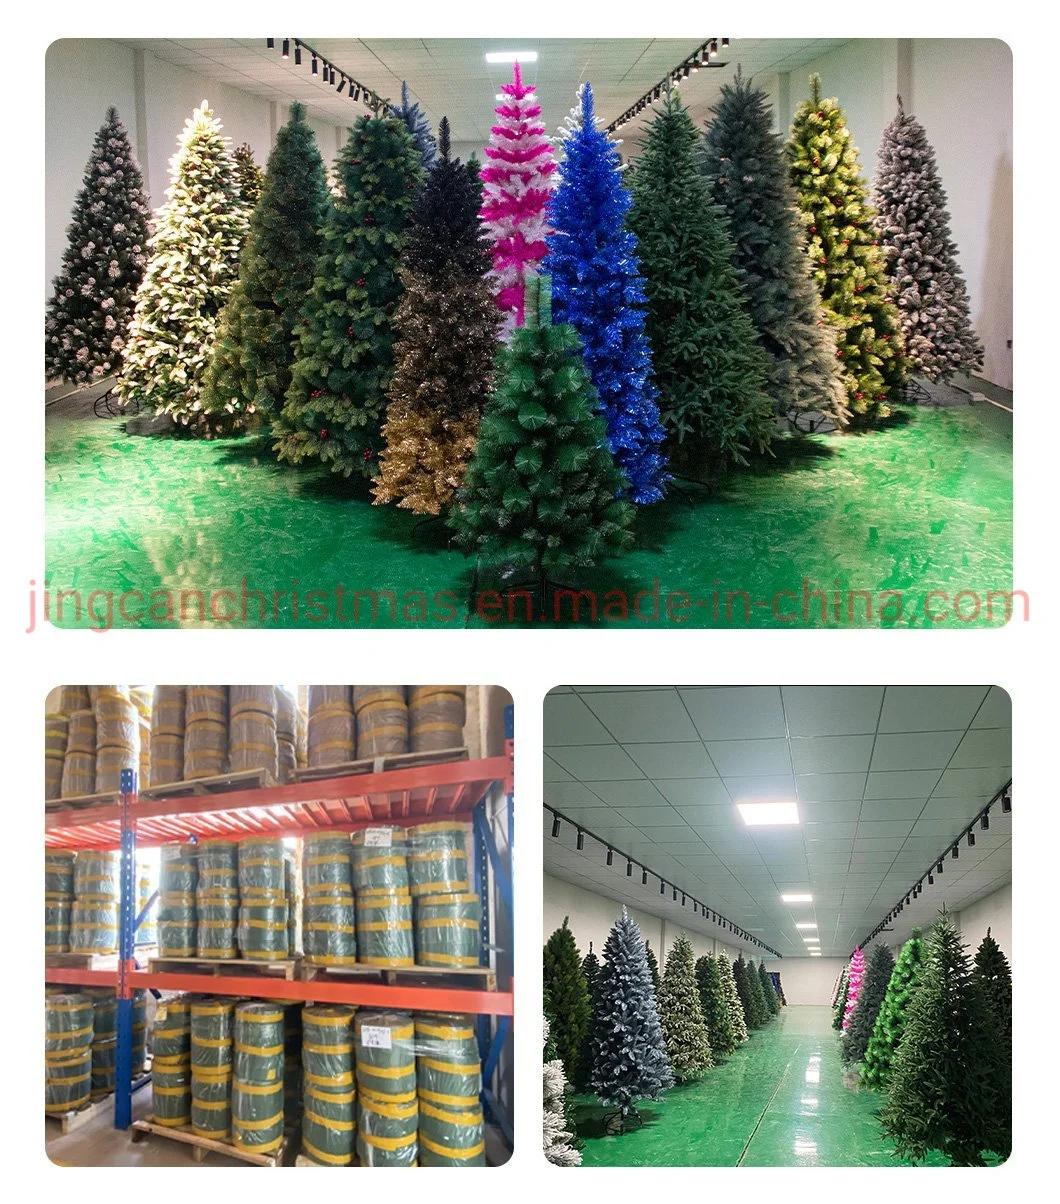 2022 Best Sellers Amazon Pine Needle with Bubble Powder Mixed PVC Christmas Tree